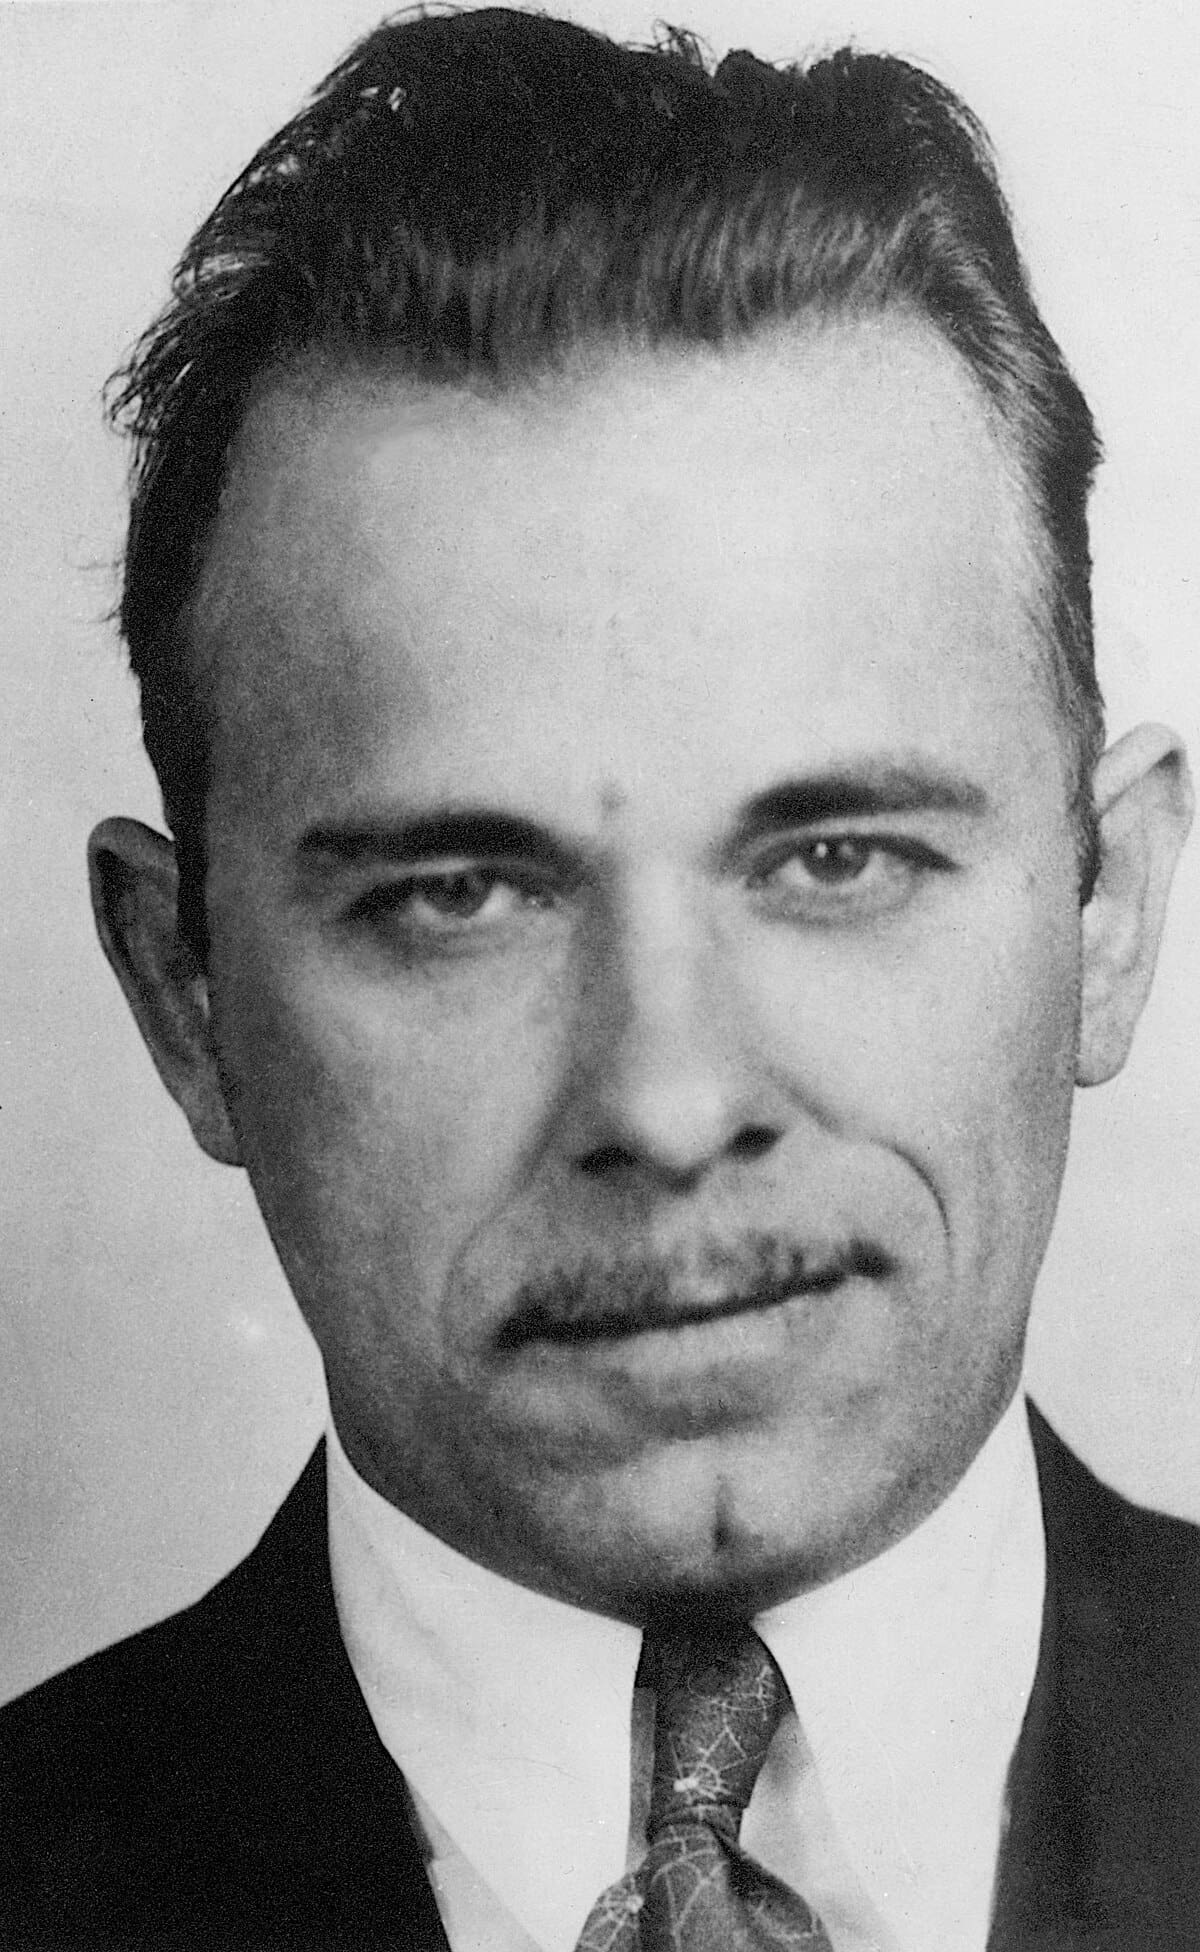 John Dillinger - The Rise and Fall of the Most Famous Criminals in History